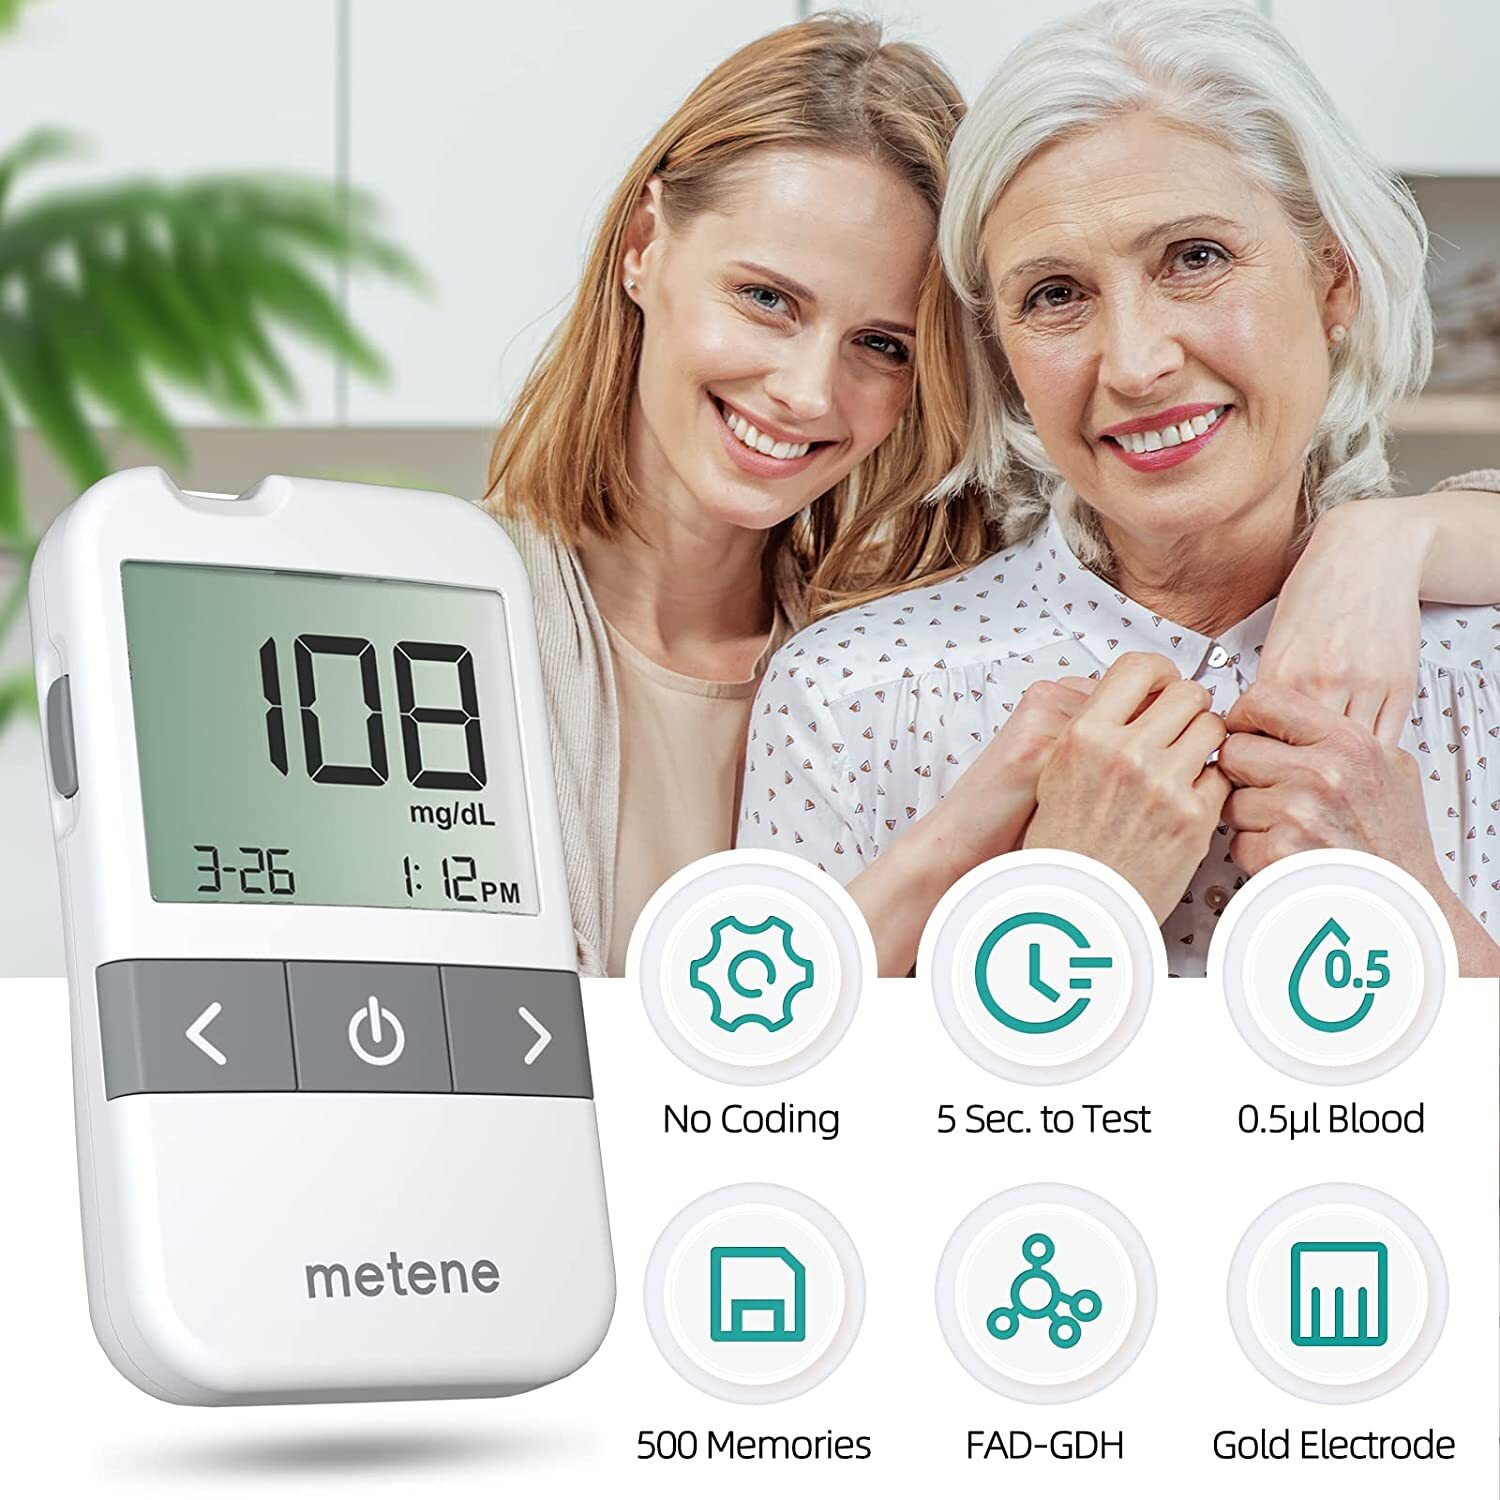 Metene AGM-513S Blood Glucose Monitor Kit, 100 Glucometer Strips, 100 Lancets, 1 Blood Sugar Monitor, 1 Control Solution, Lancing Device and Carrying Bag, No Coding - image 5 of 7